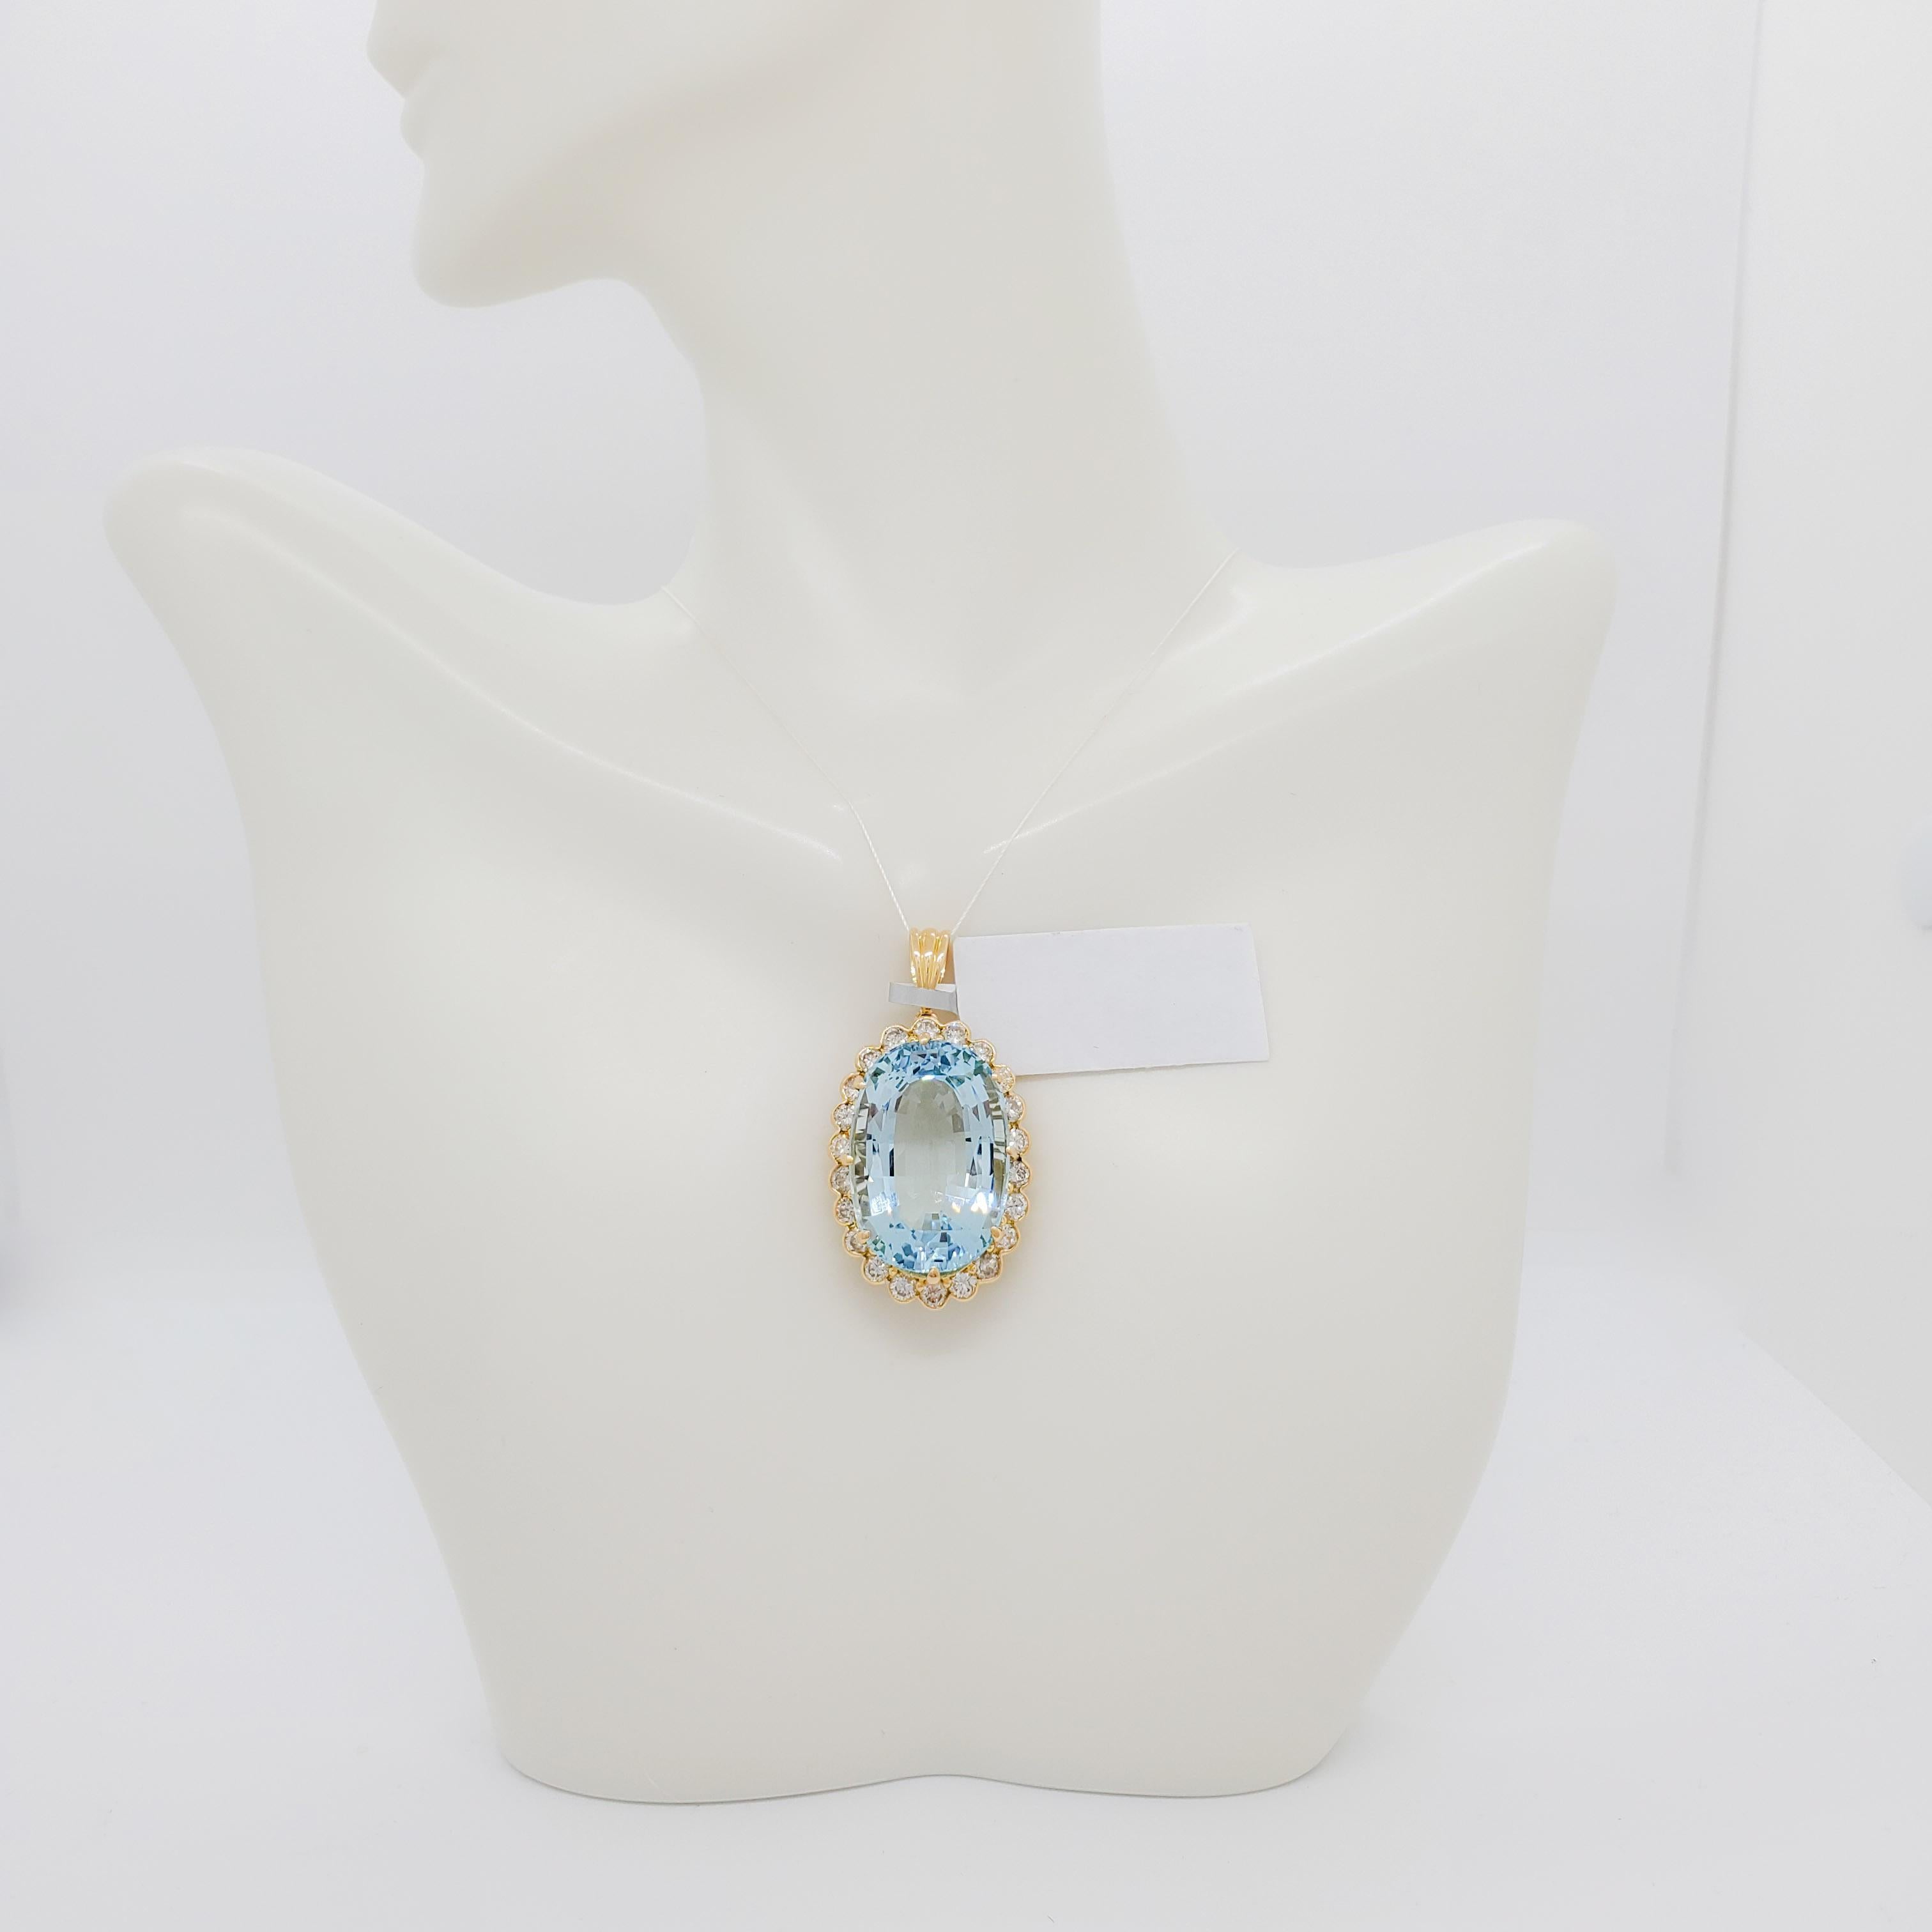 Beautiful 28.12 ct. aquamarine oval with 2.57 ct. good quality white diamond rounds. Handmade in 18k yellow gold.  This piece is well made and the aquamarine has a gorgeous color and crystal.